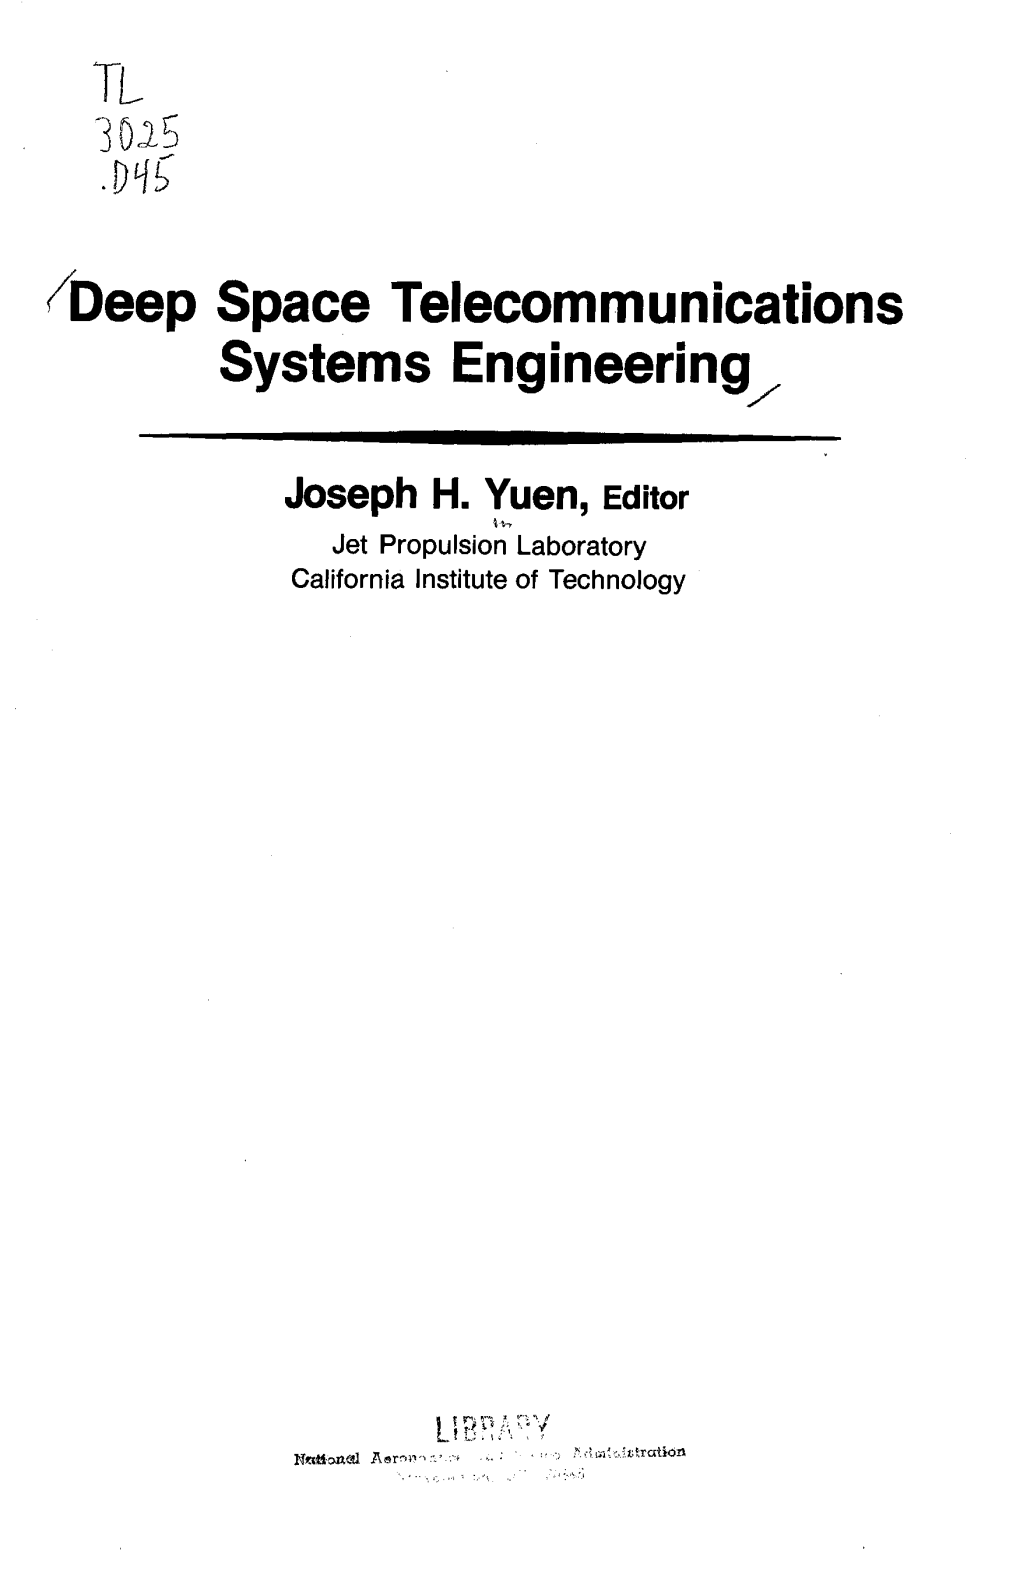 Deep Space Telecommunications Systems Engineering"